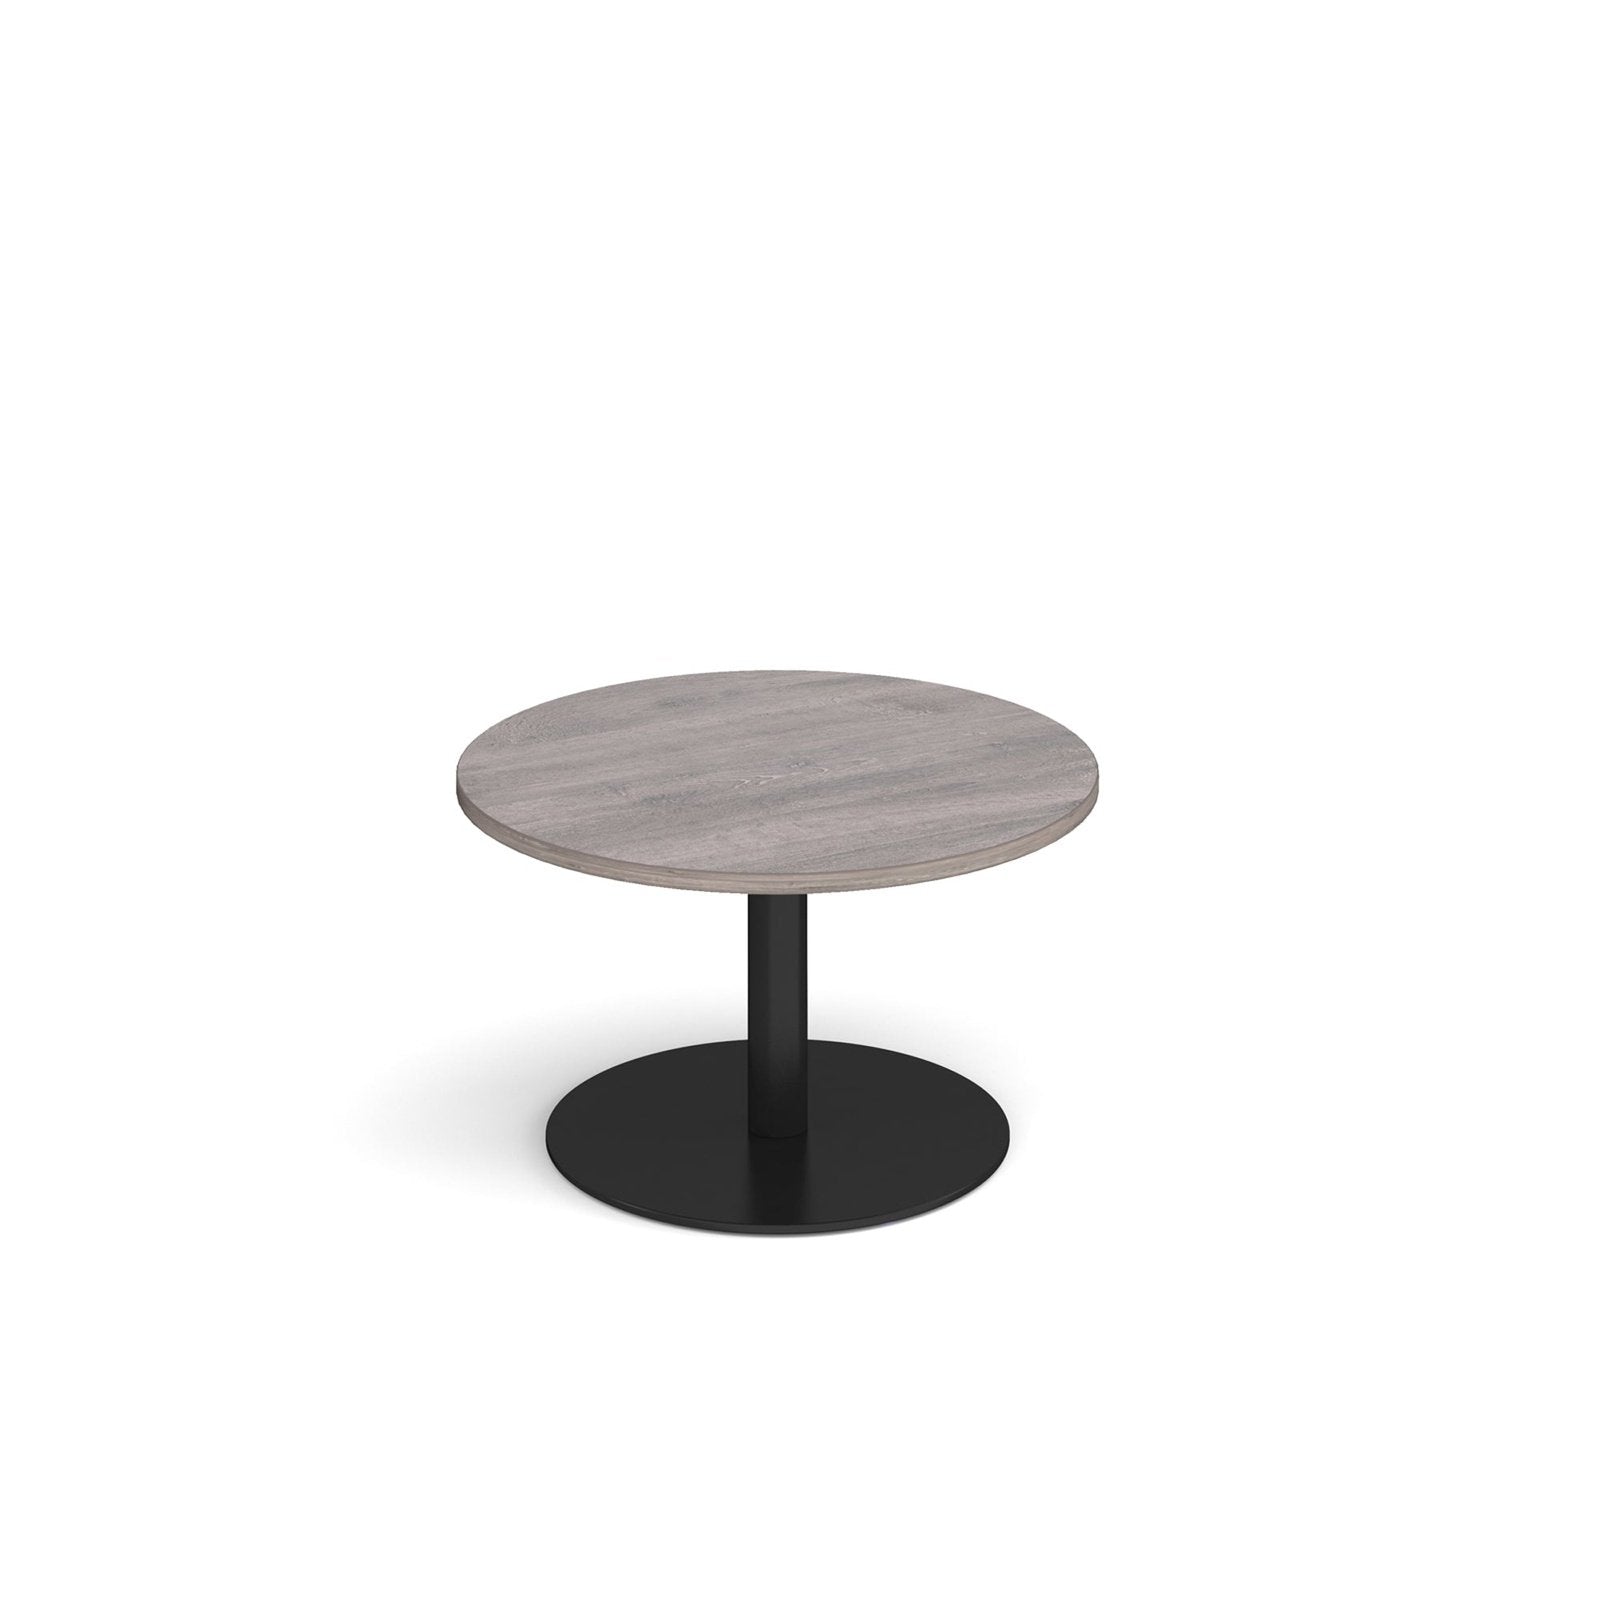 Monza circular coffee table with flat round base - Office Products Online